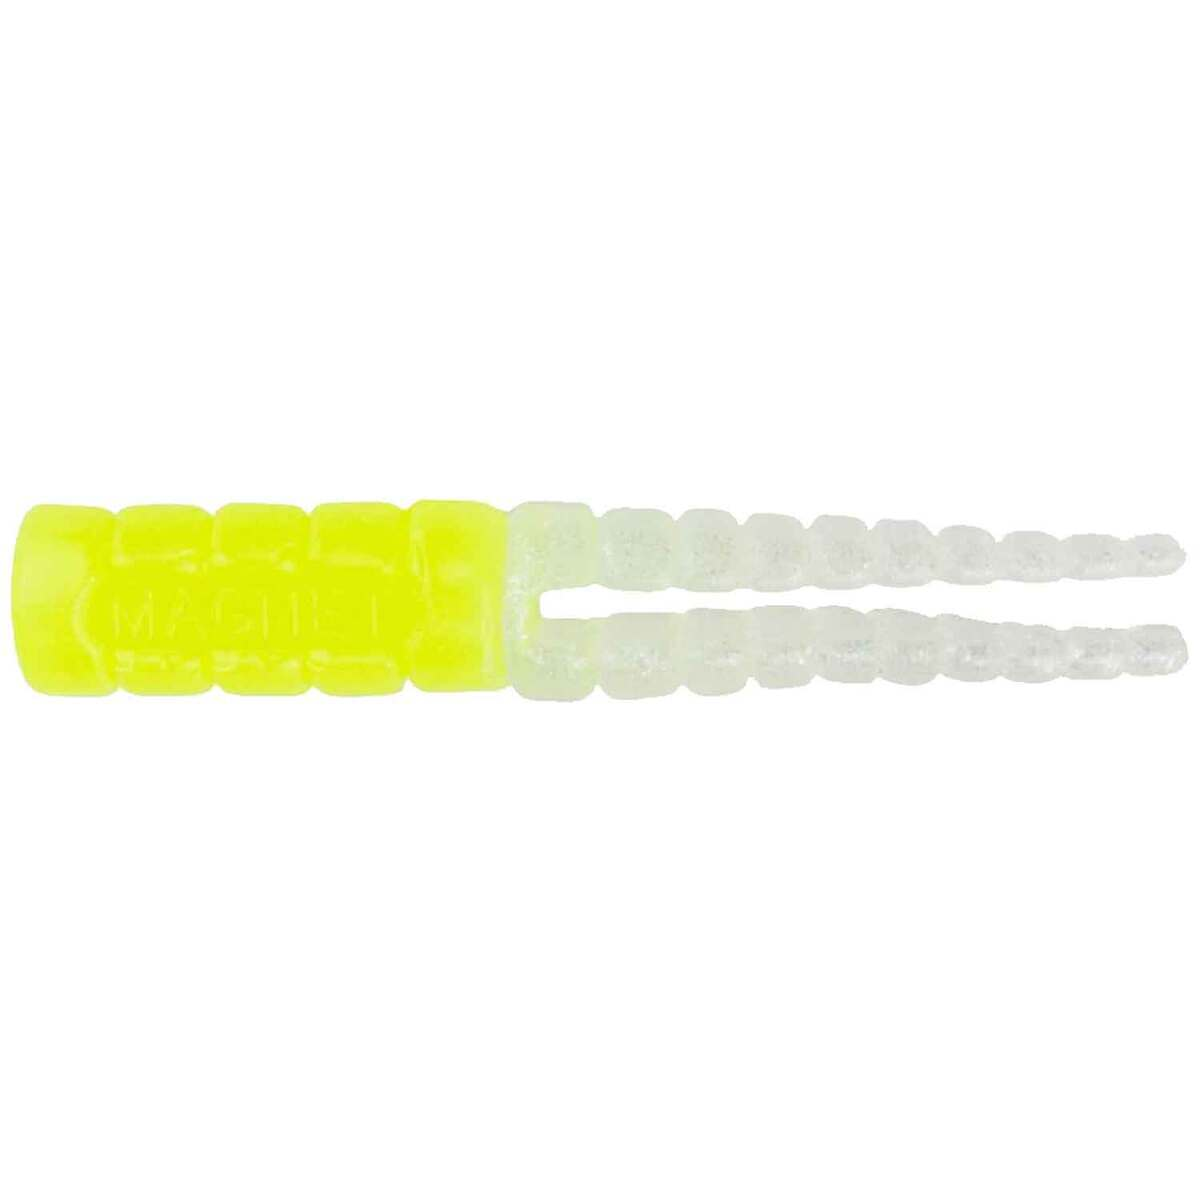 LELAND LURES CRAPPIE MAGNET 15PC BODY PACKS - 0